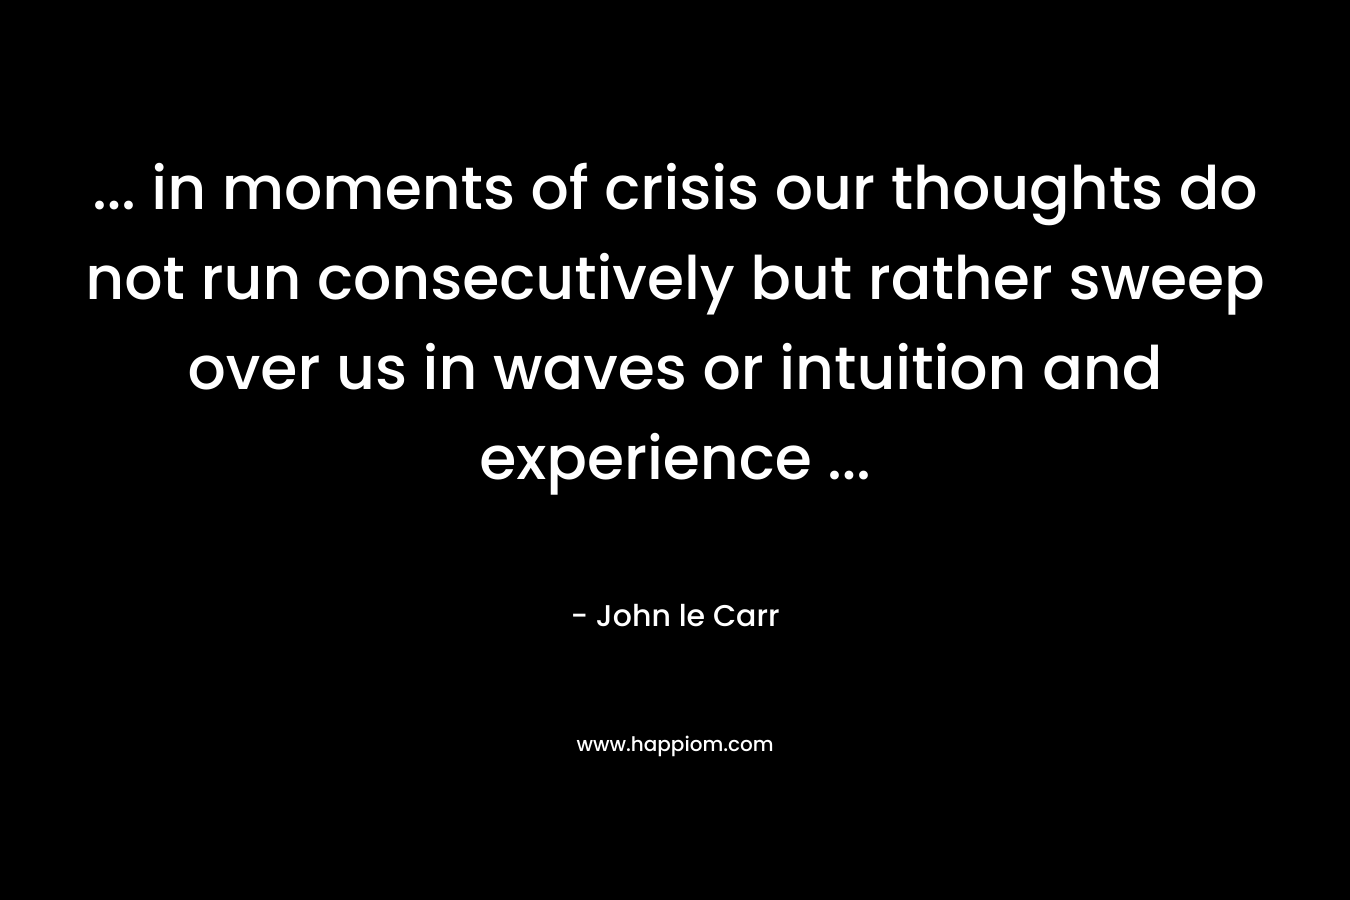 … in moments of crisis our thoughts do not run consecutively but rather sweep over us in waves or intuition and experience … – John le Carr